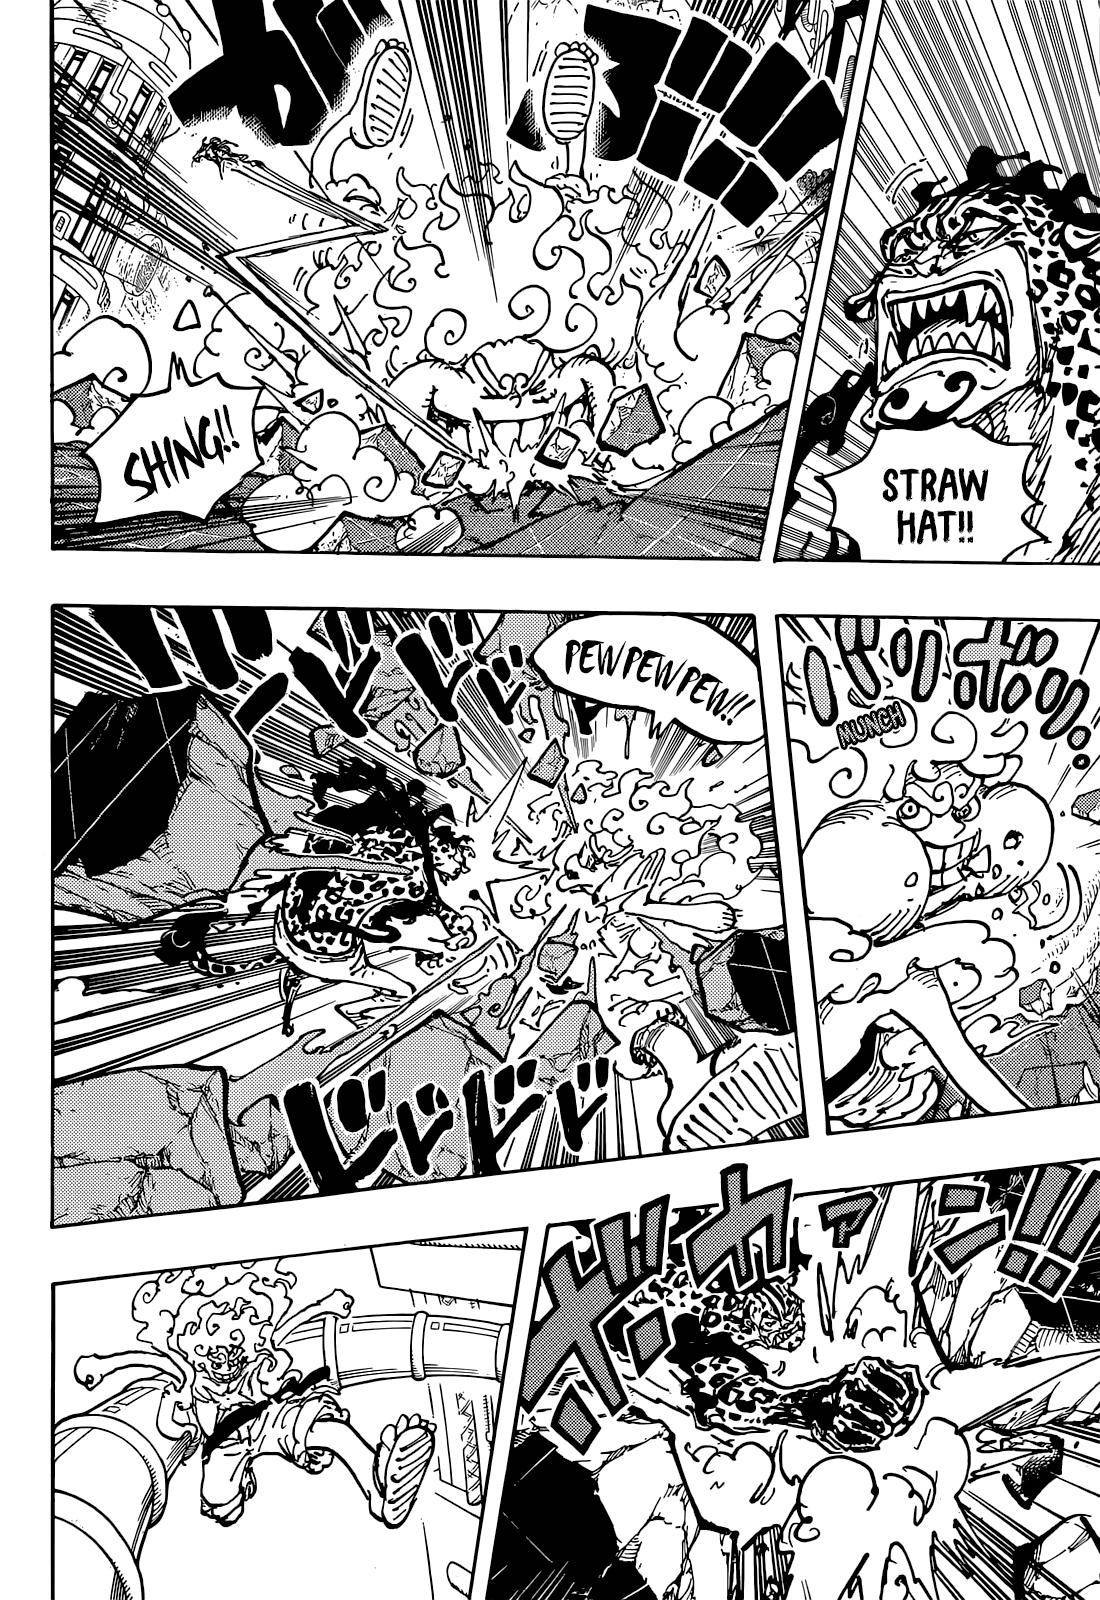 Read One Piece Chapter 1070 11